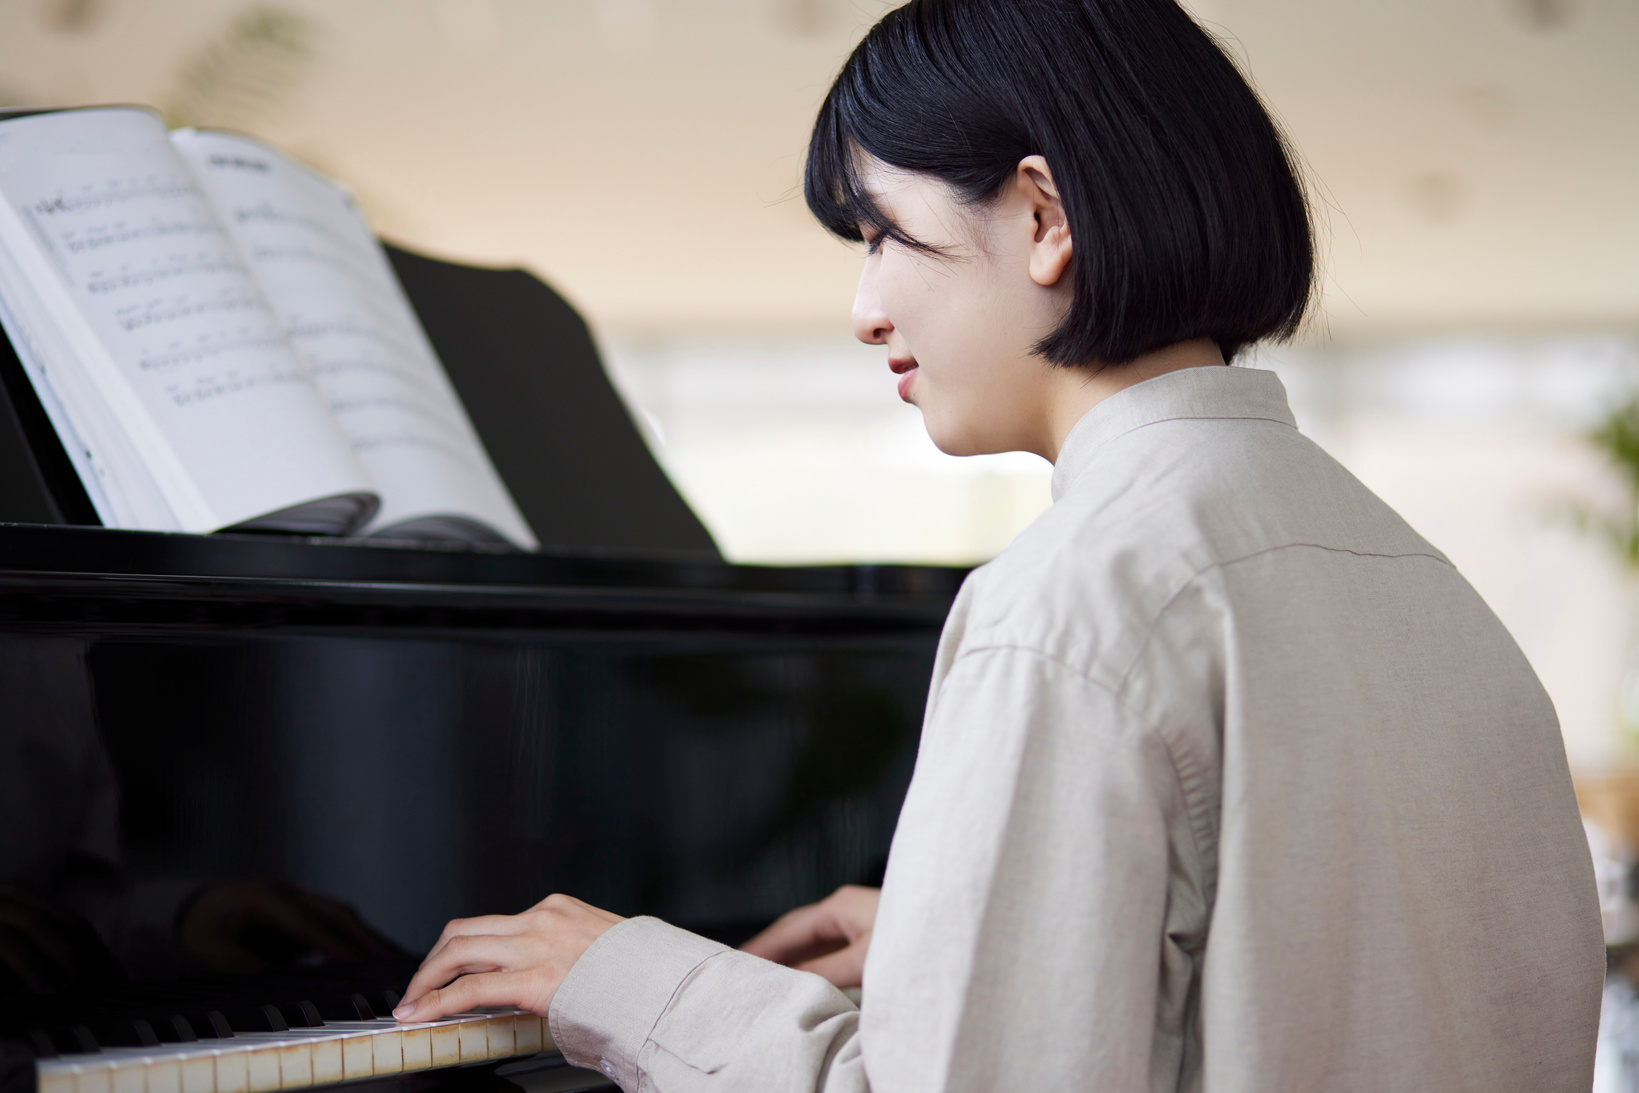 Young Japanese women playing the piano